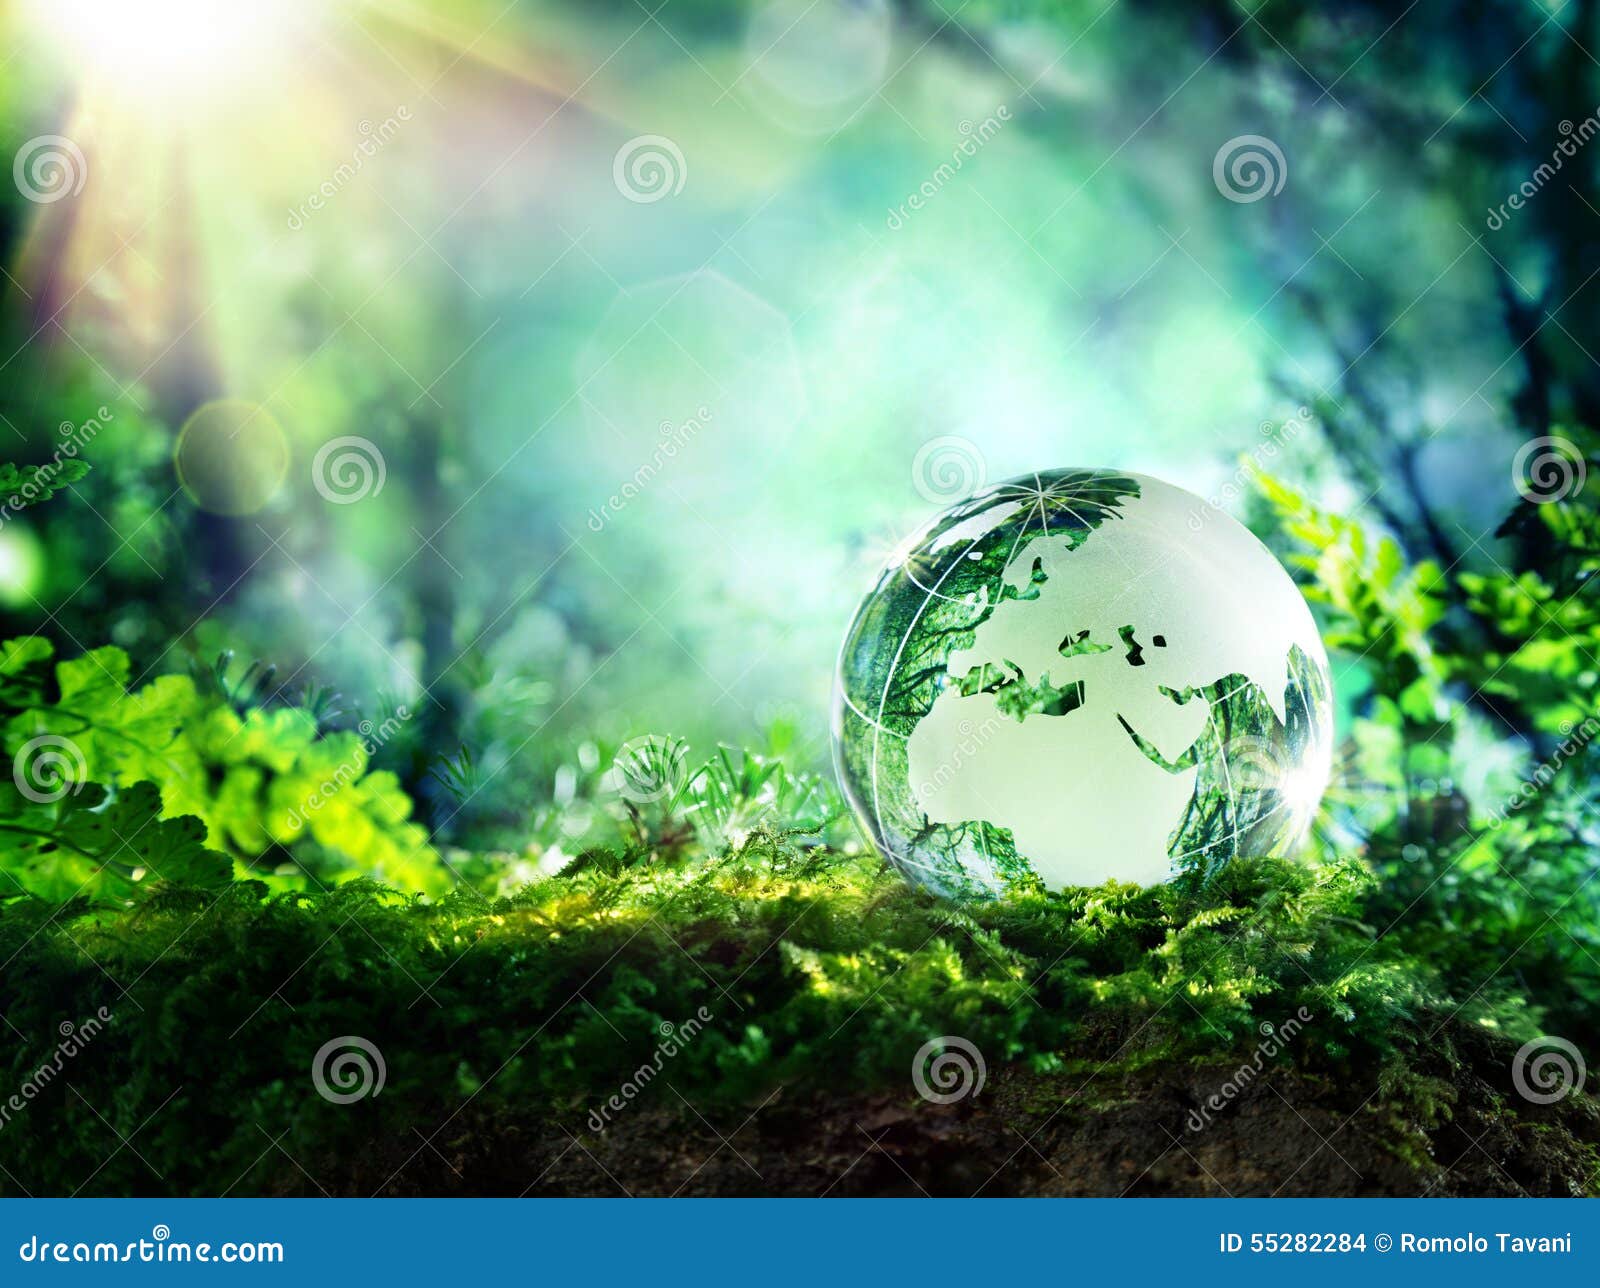 globe on moss in a forest - europe